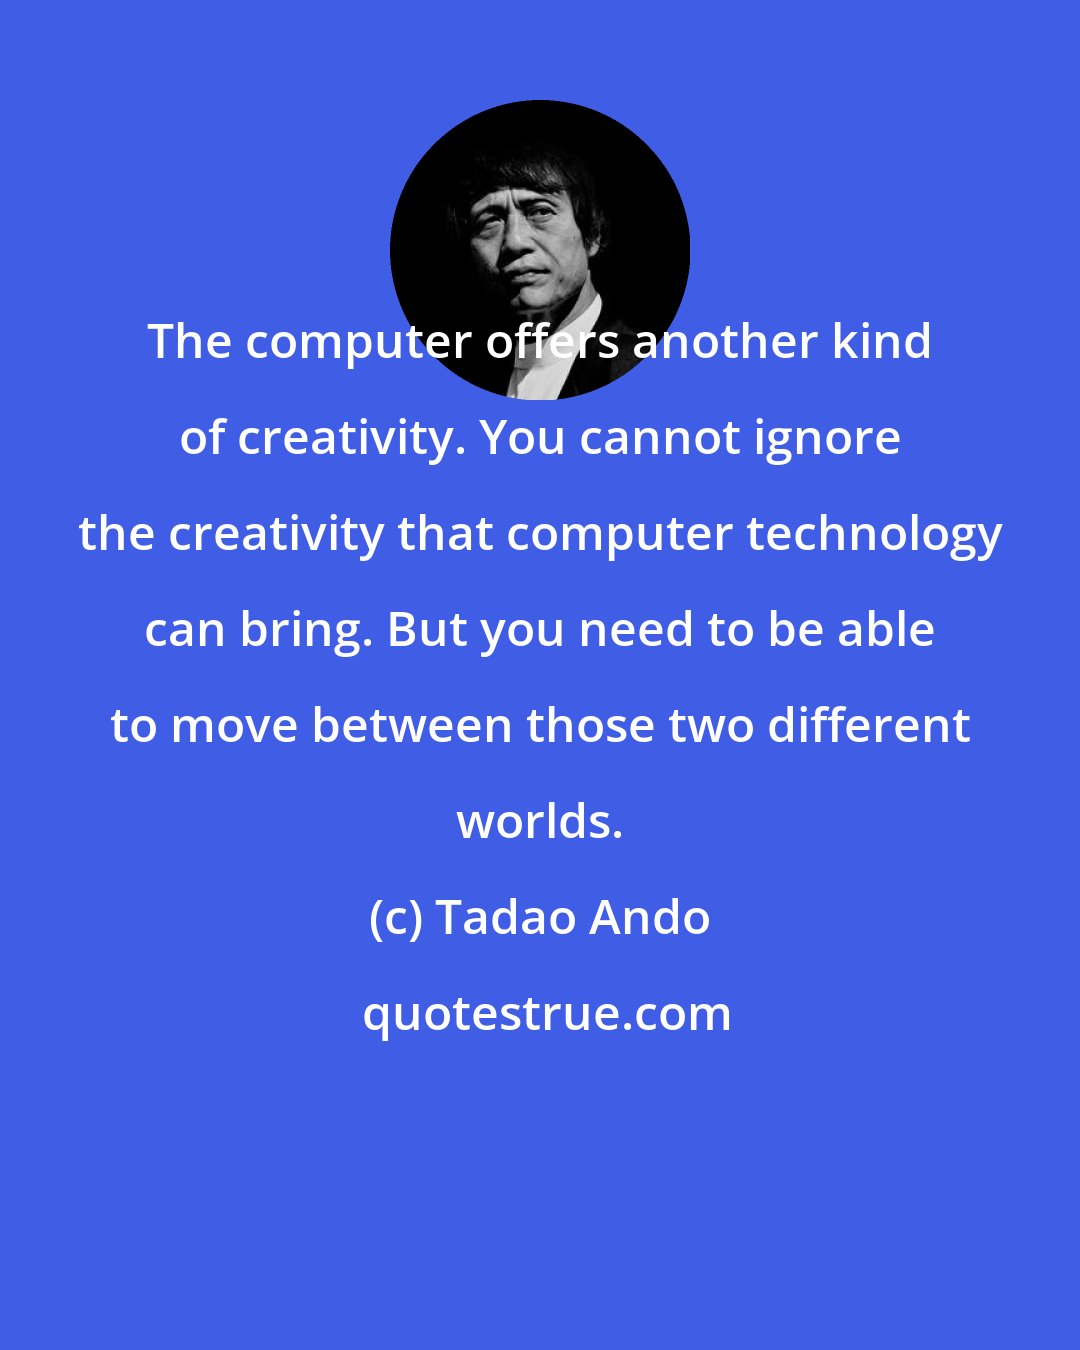 Tadao Ando: The computer offers another kind of creativity. You cannot ignore the creativity that computer technology can bring. But you need to be able to move between those two different worlds.